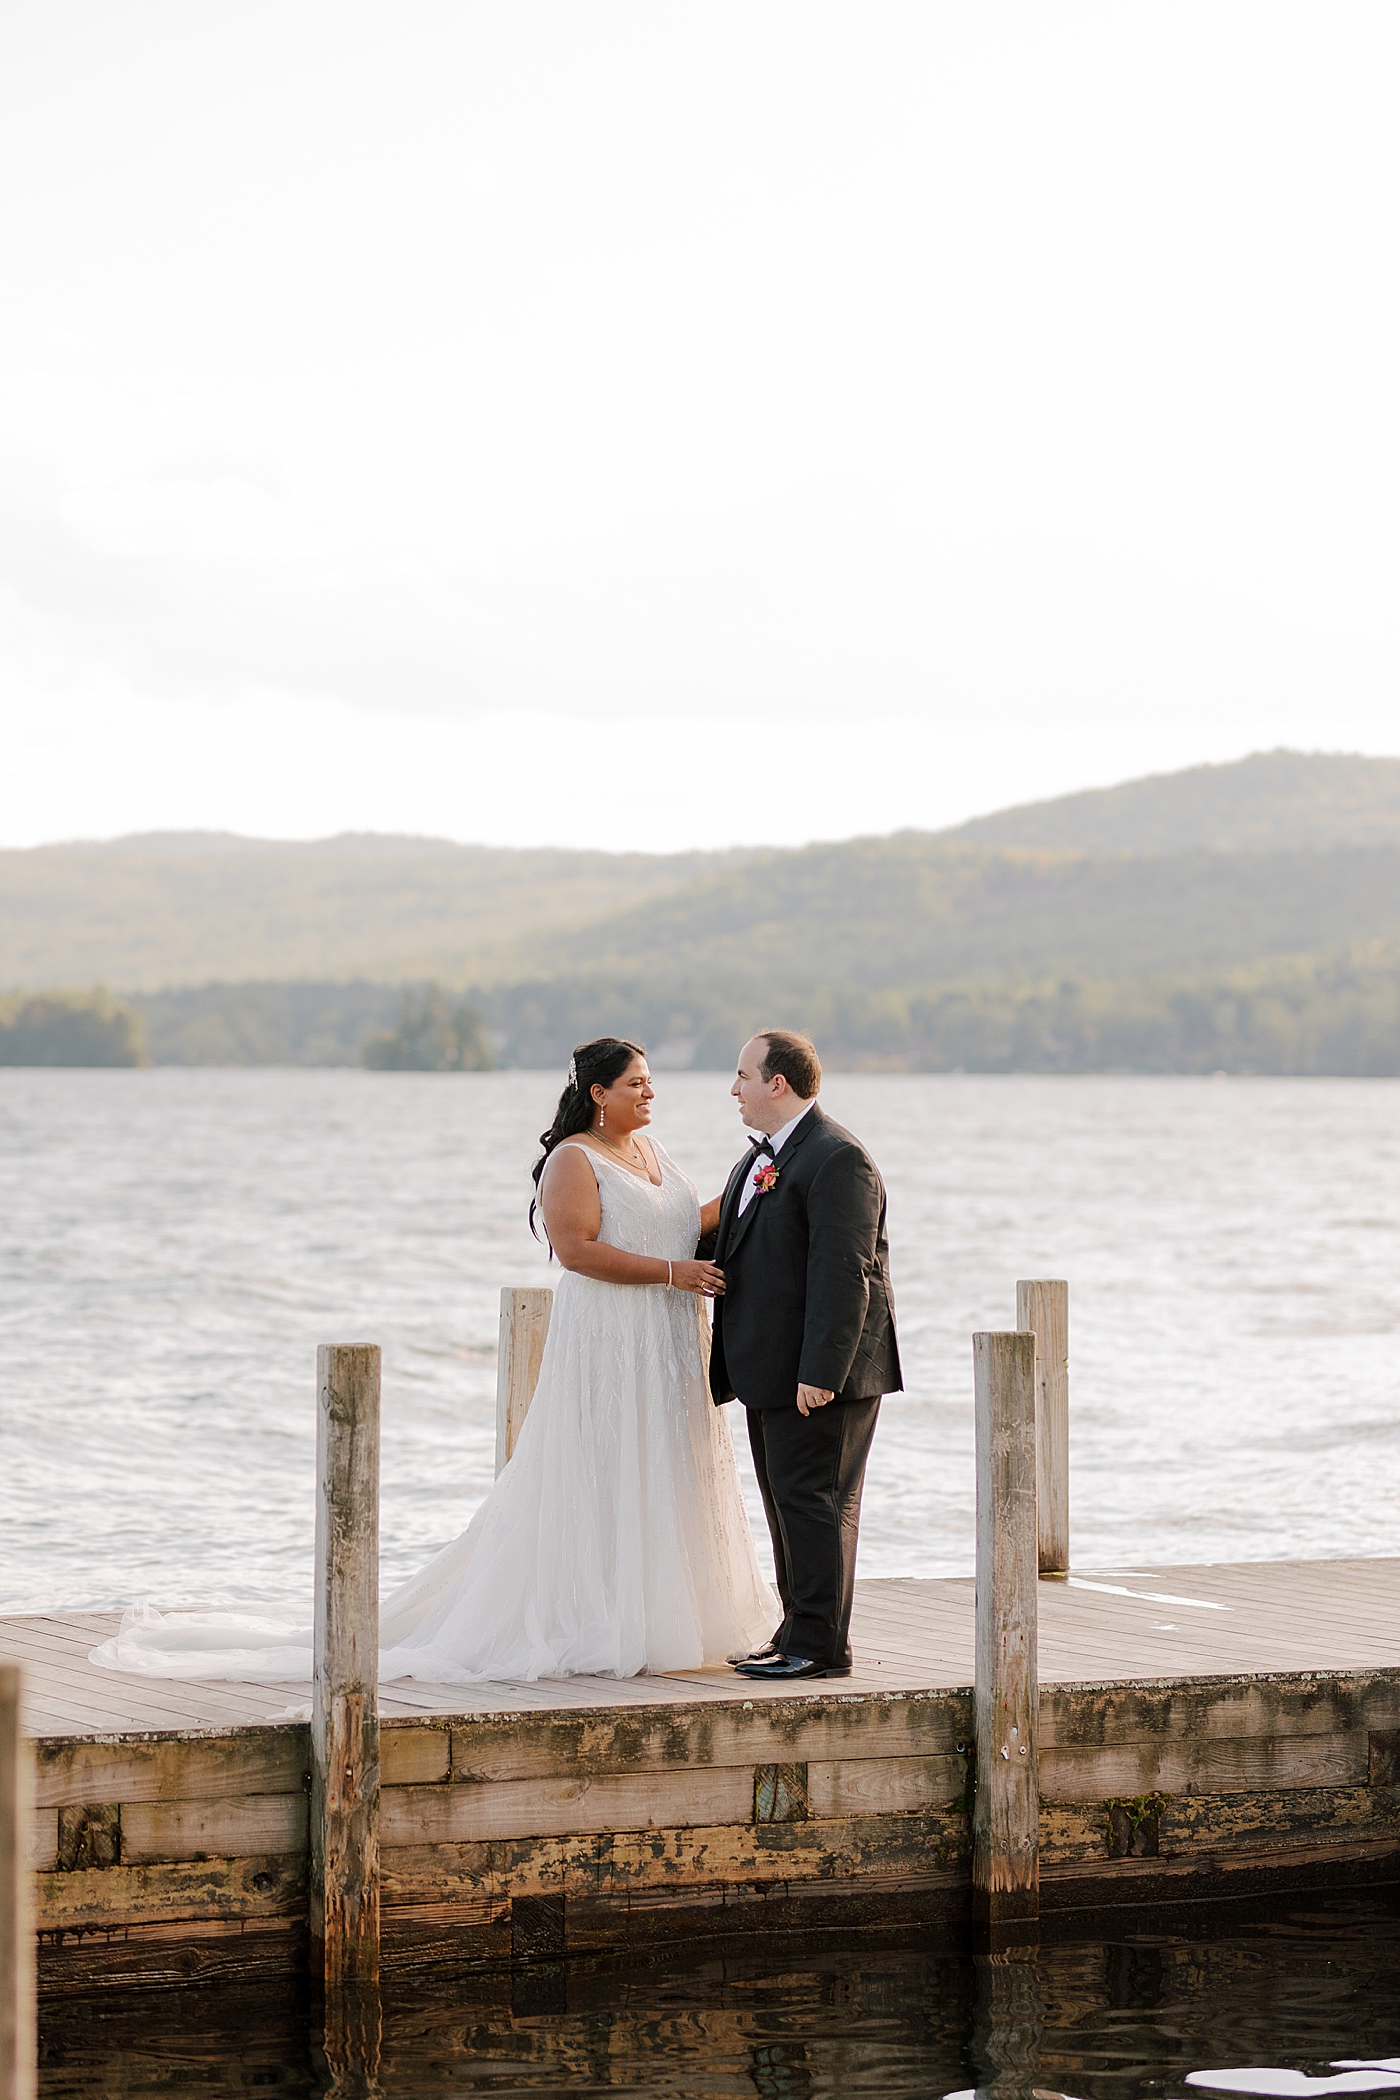 Bride and groom laughing together on a dock at sunset | Image by Hope Helmuth Photography